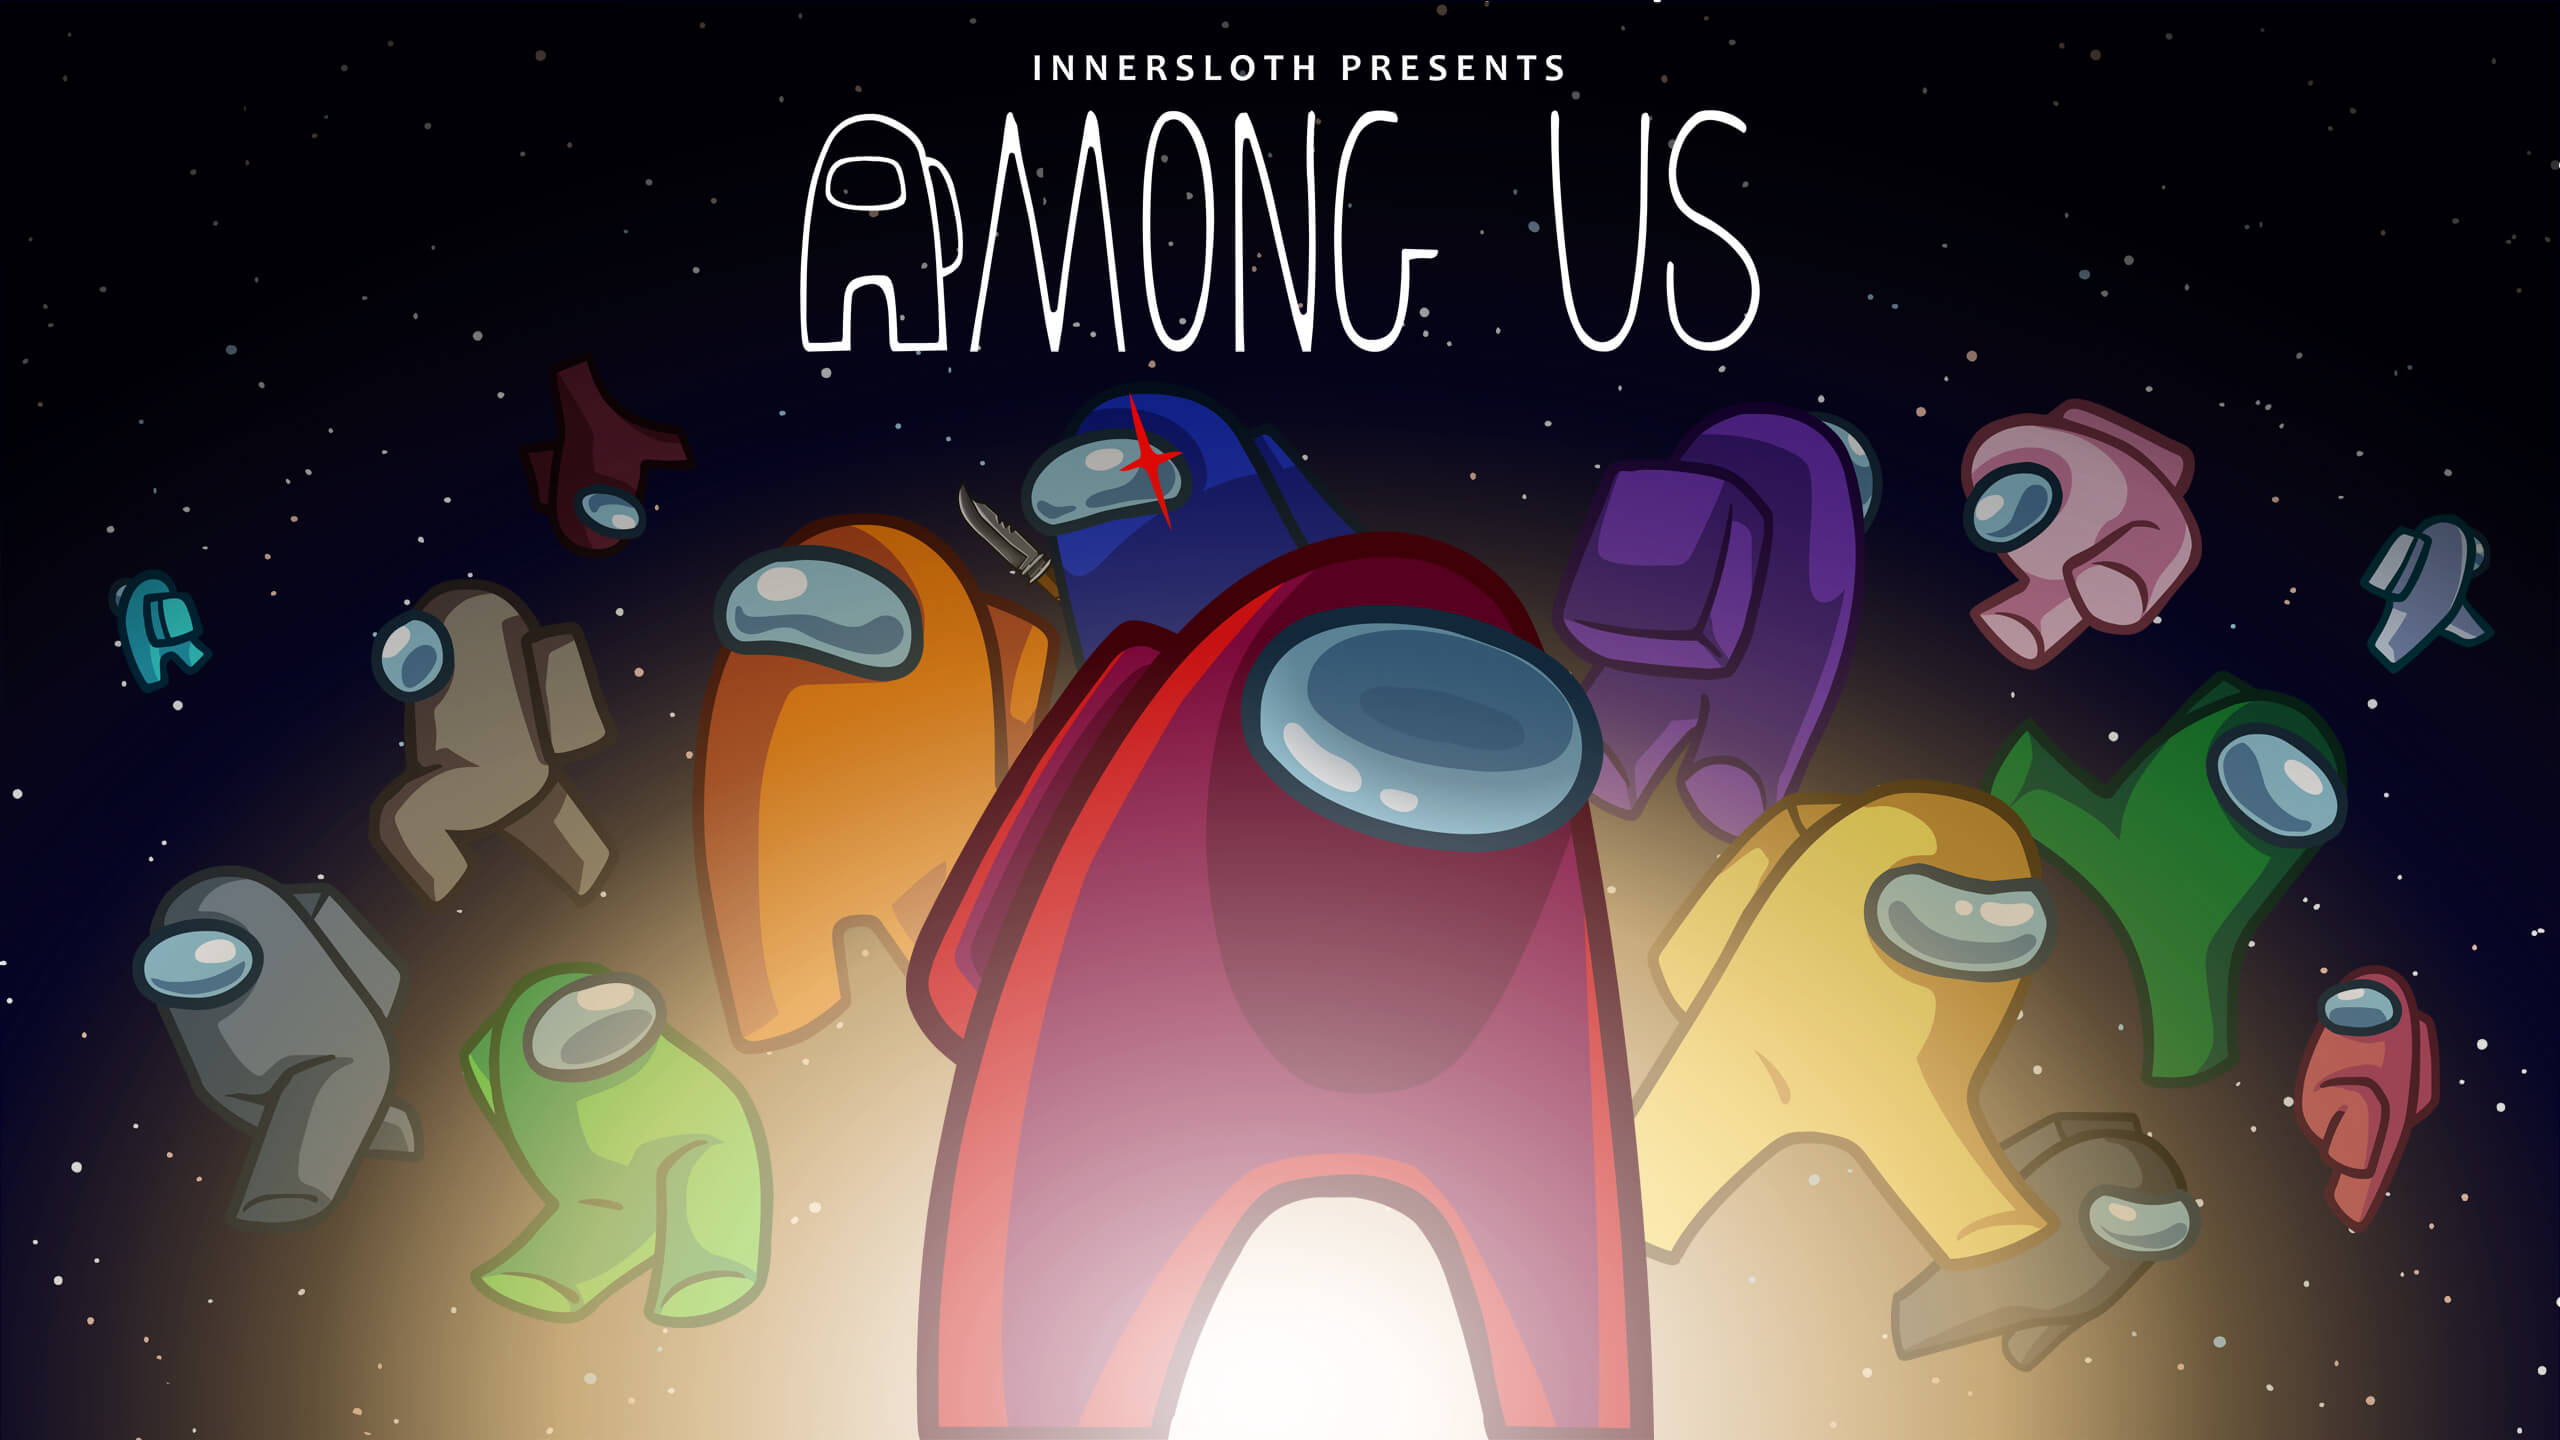 Among us Sus wallpaper by chronicxshad0w - Download on ZEDGE™